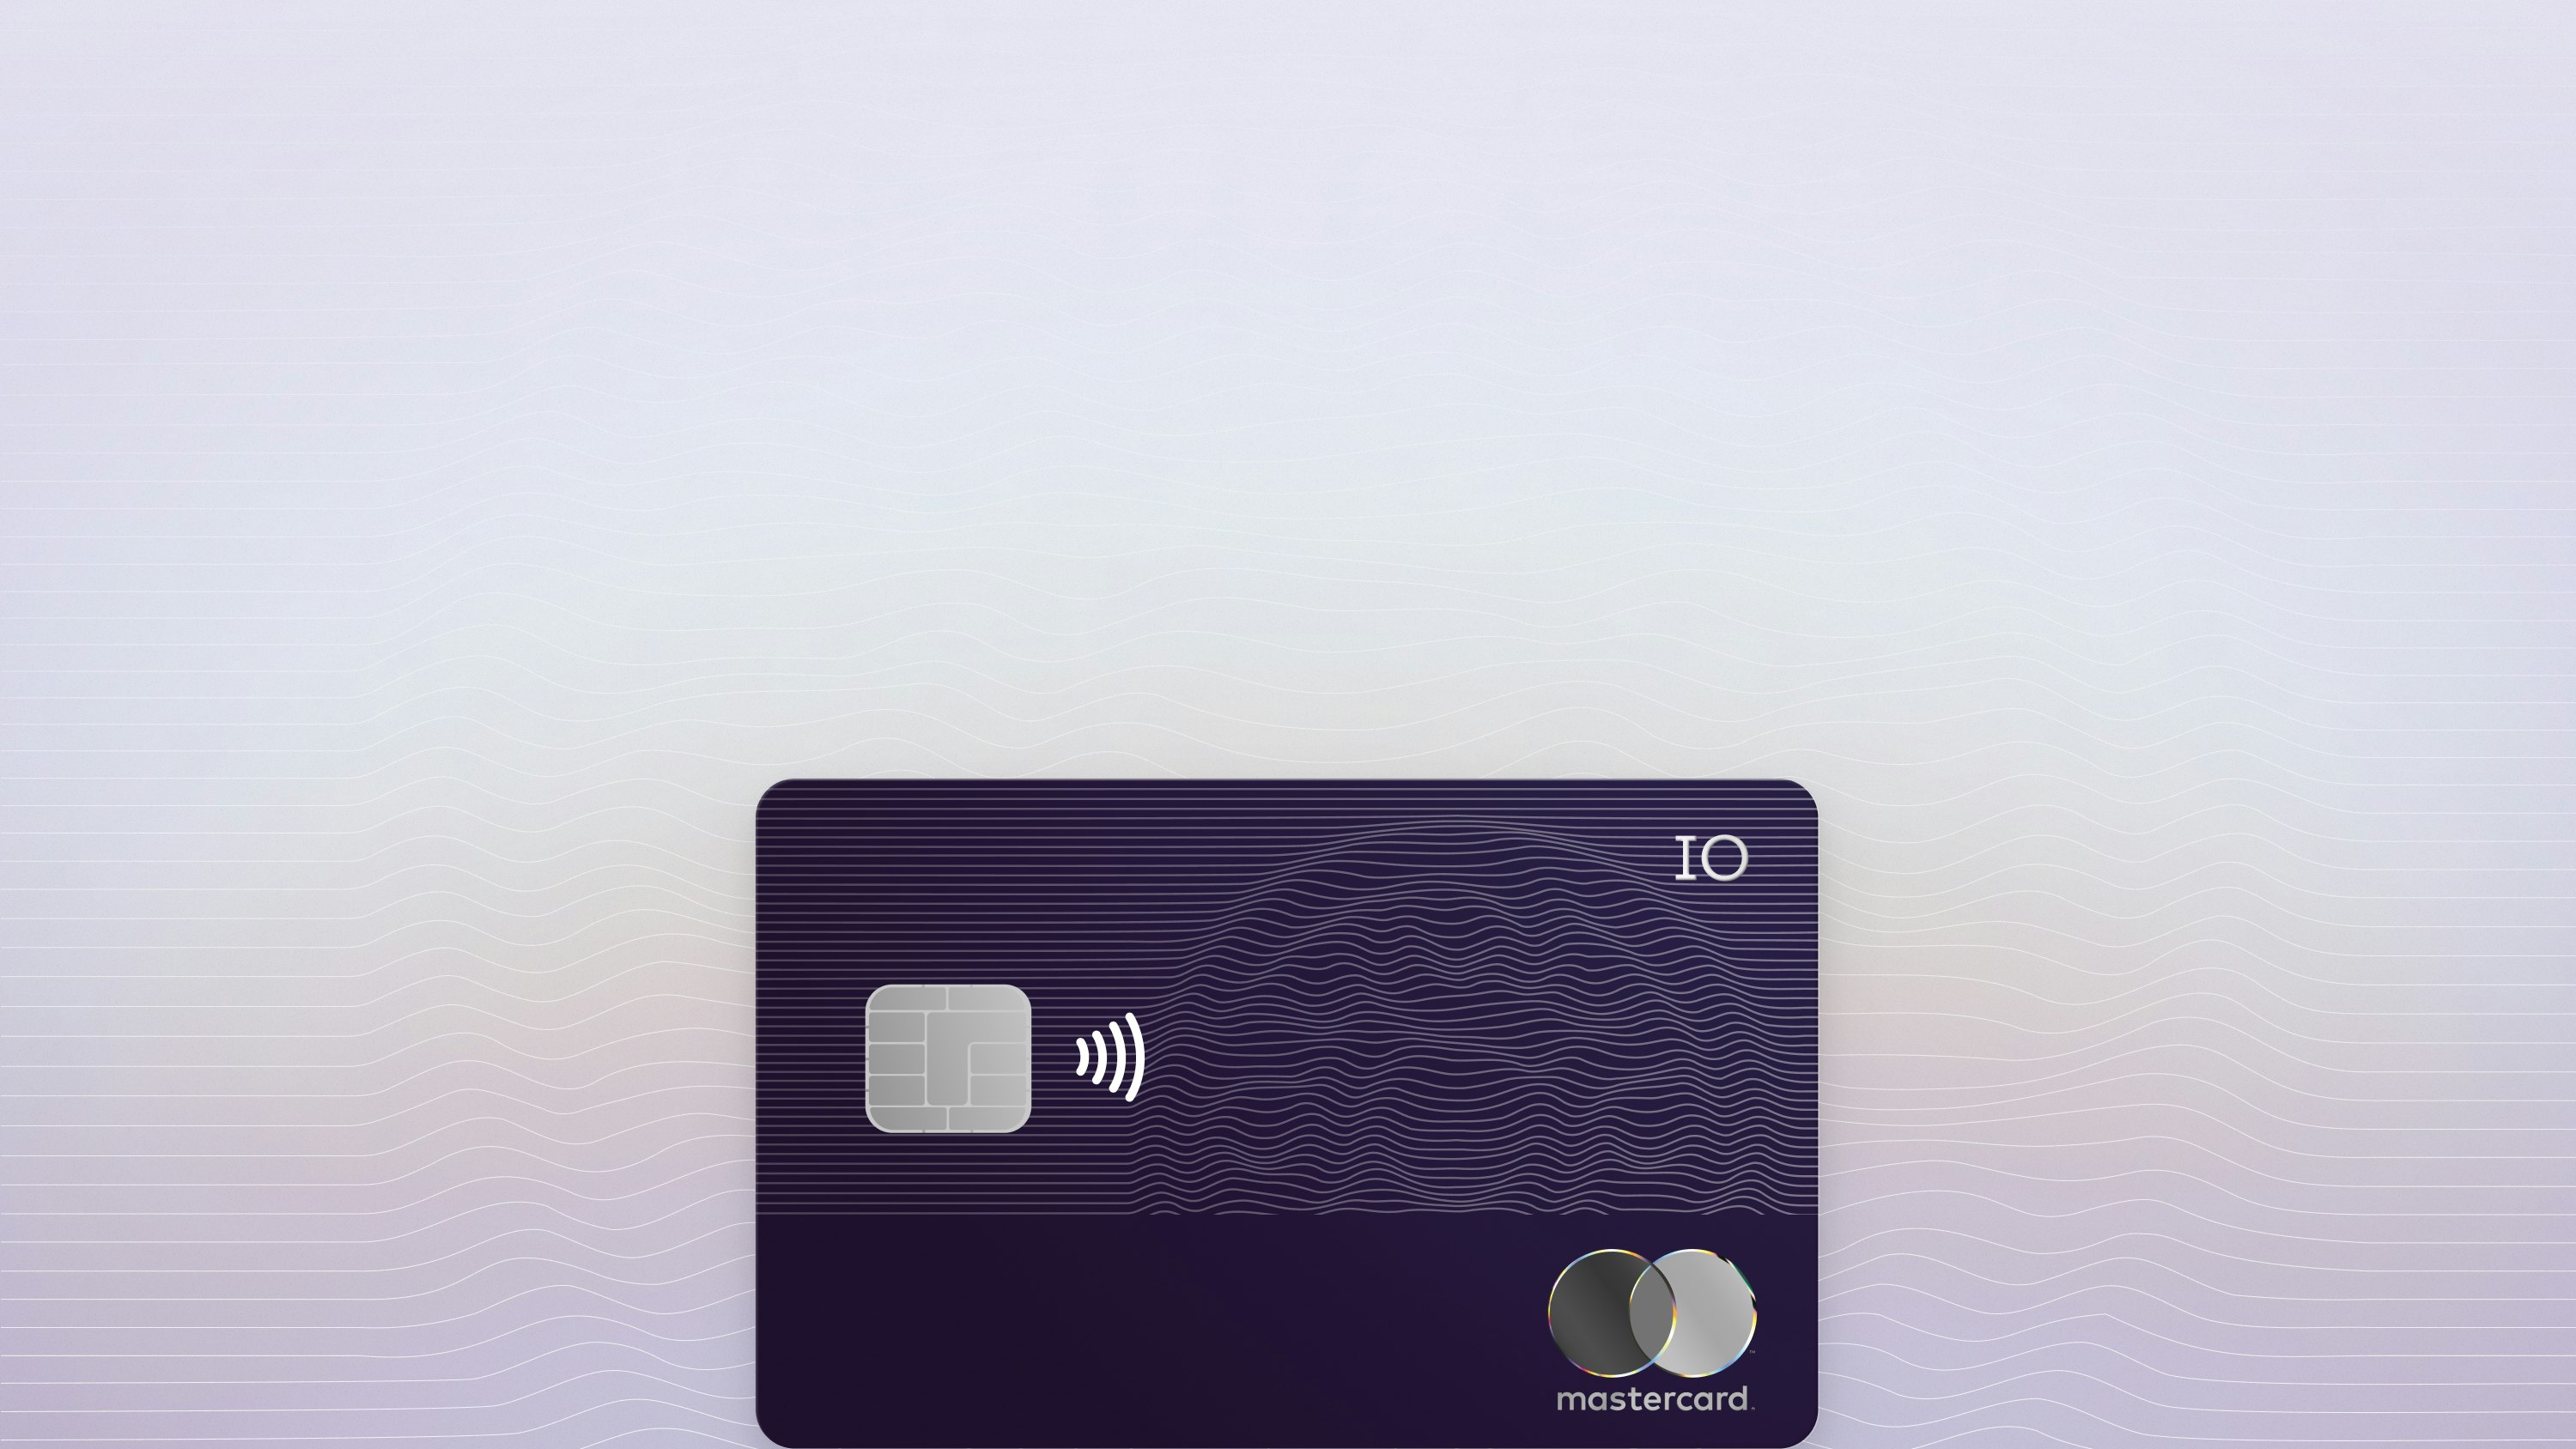 Image of the IO card at an angle with line drawing of IO logo in the background